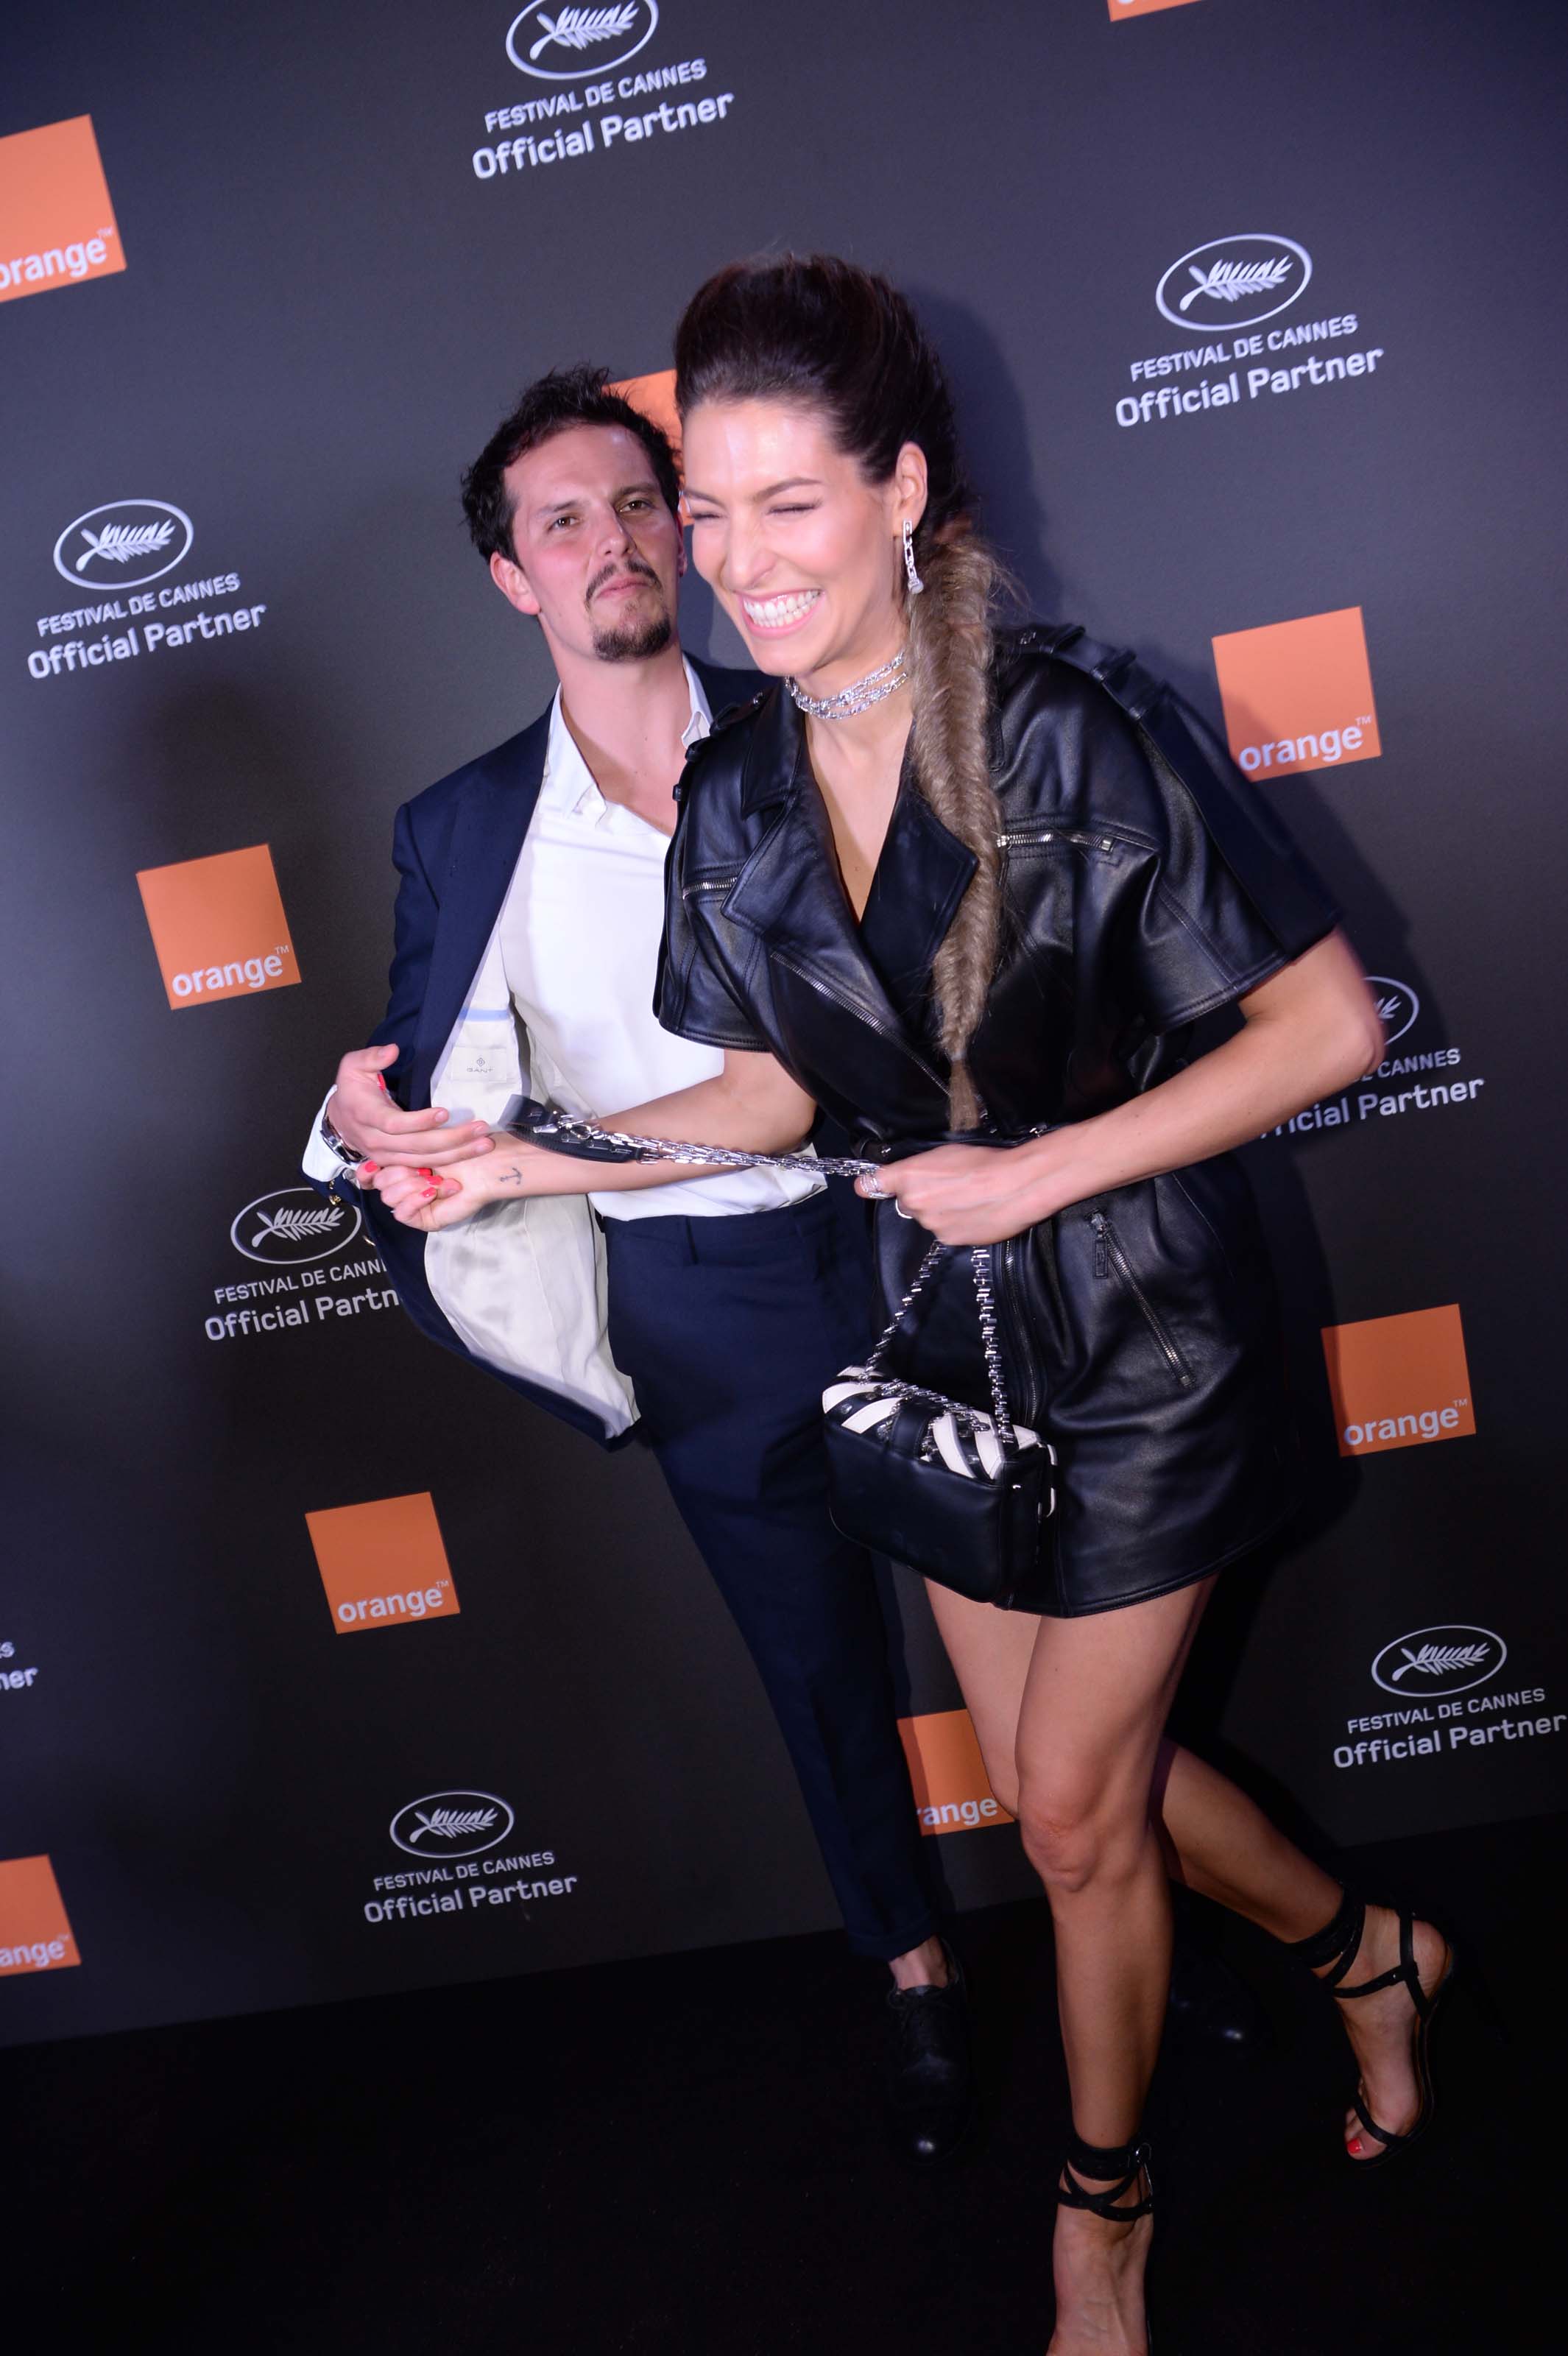 Laury Thilleman attends Orange party